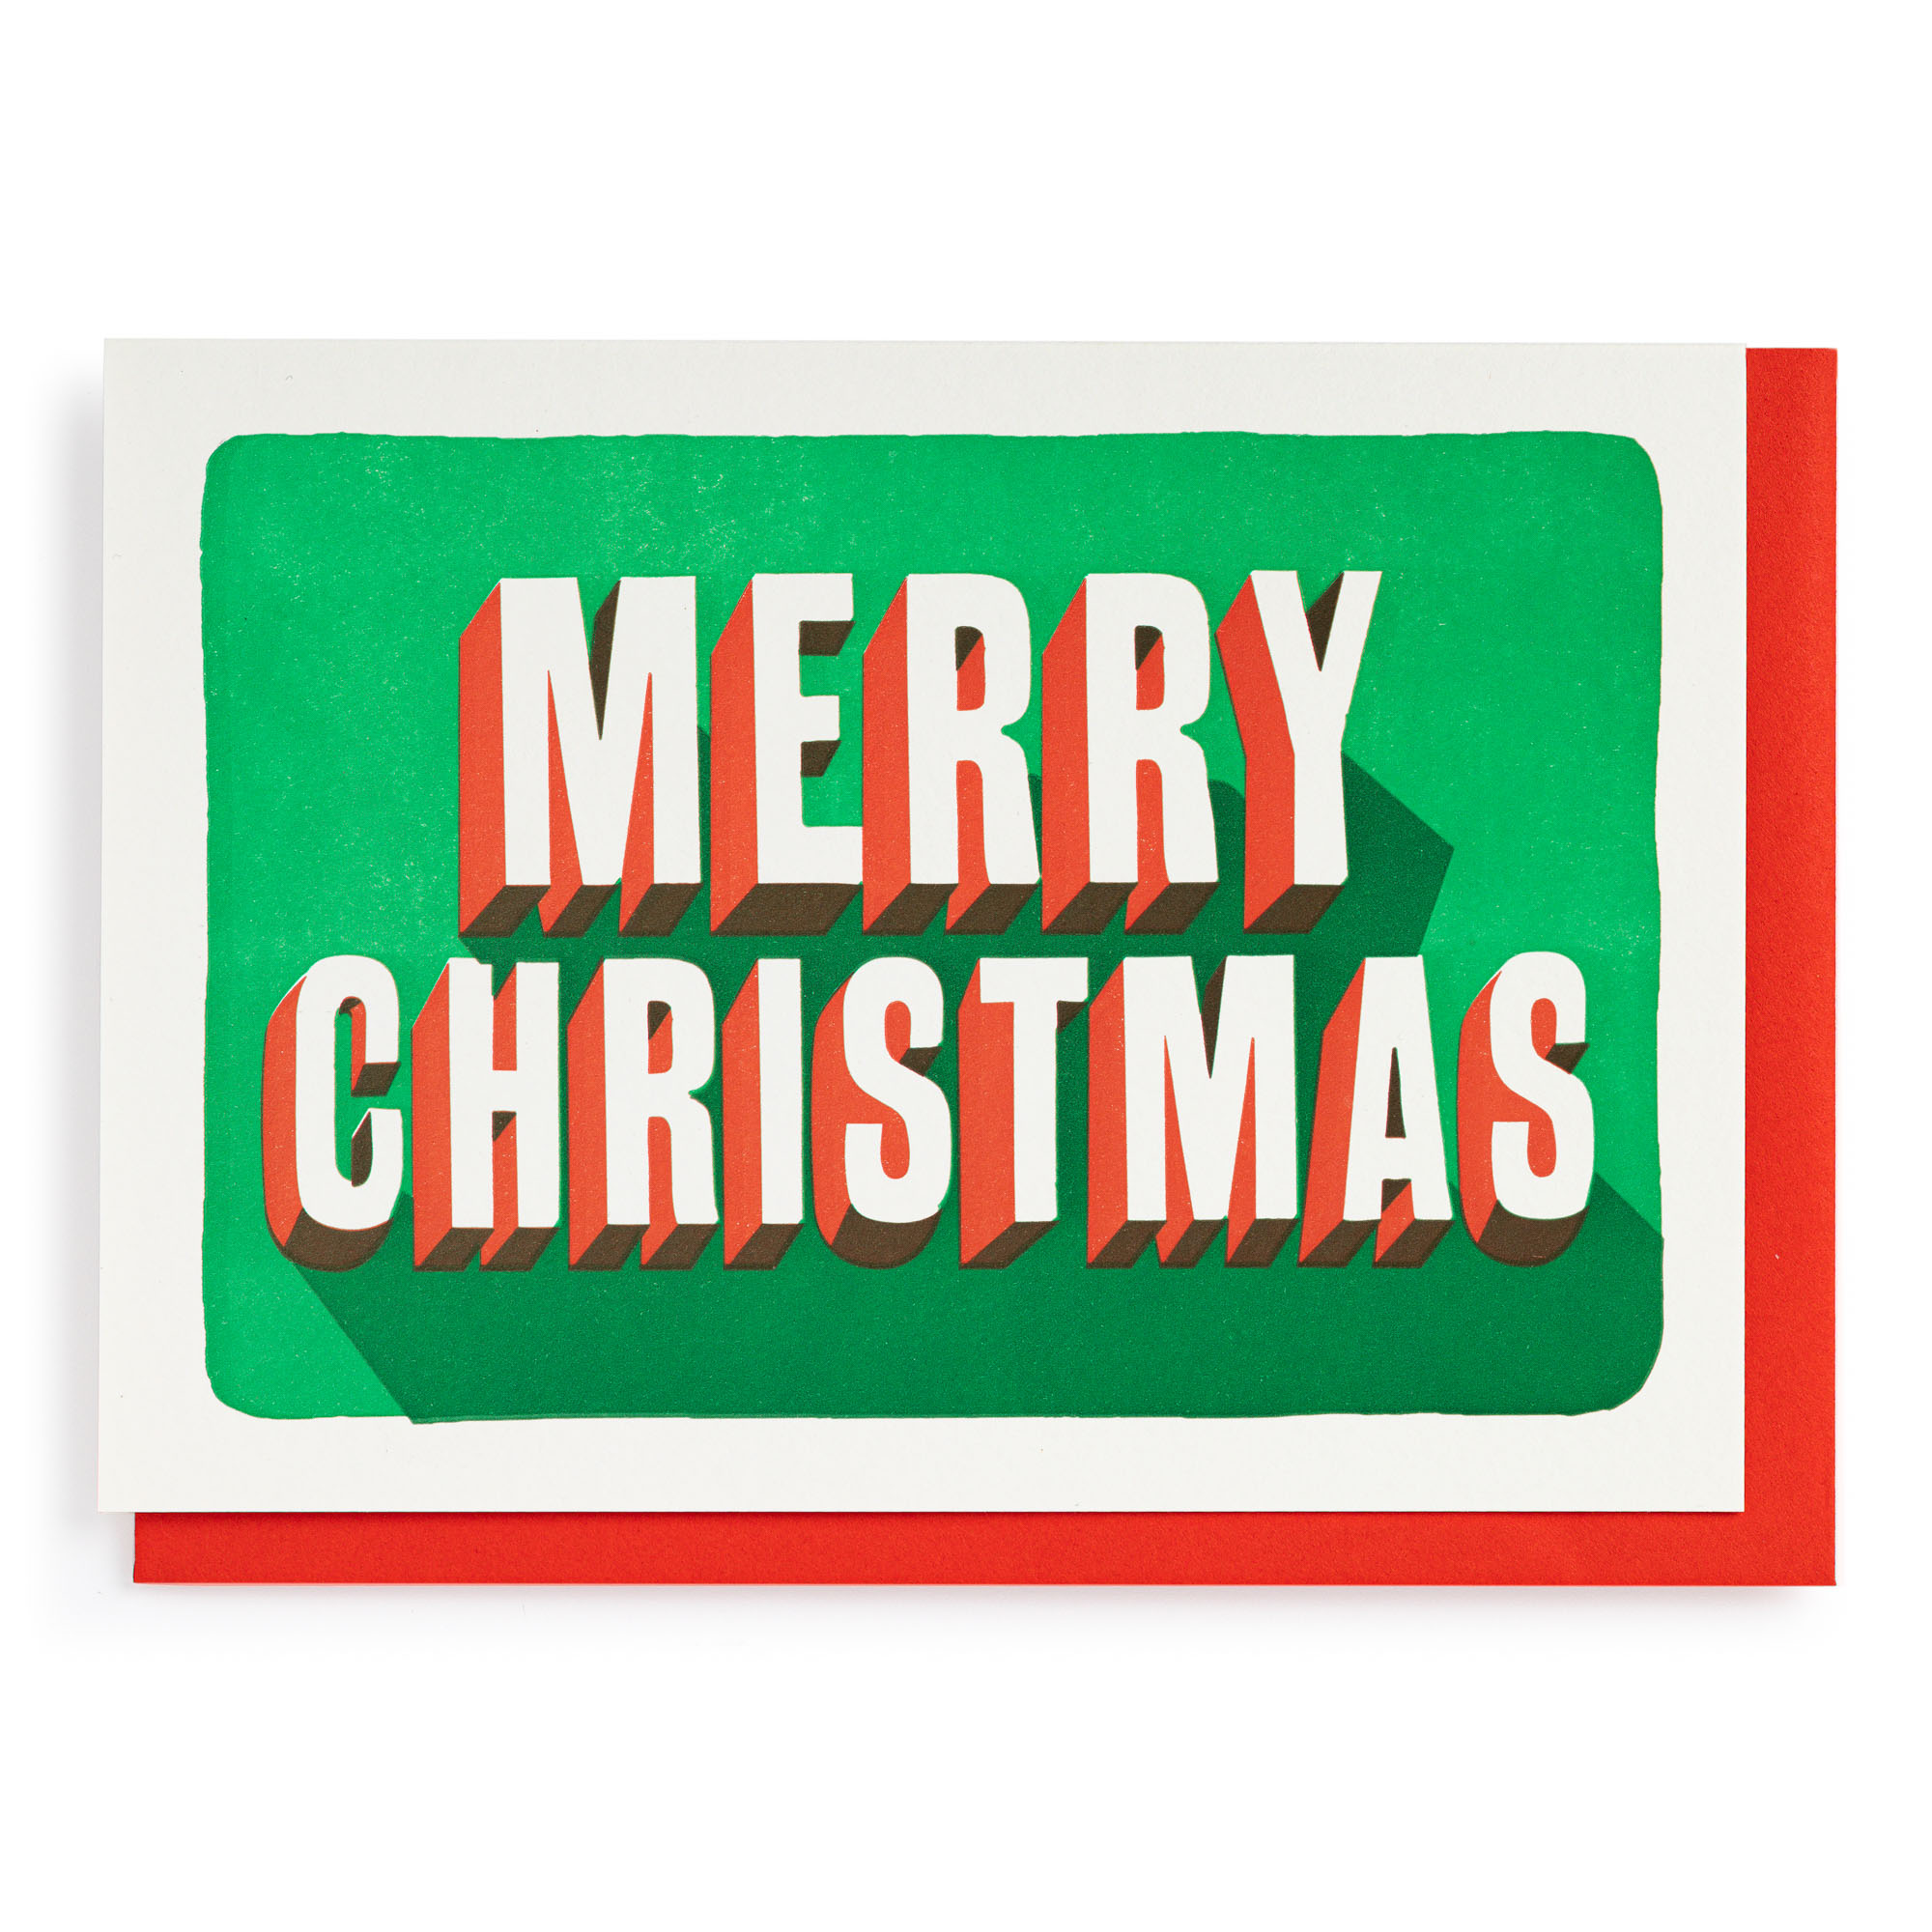 Merry Christmas - Letterpress Cards - Archivist QPs - from Archivist Gallery 